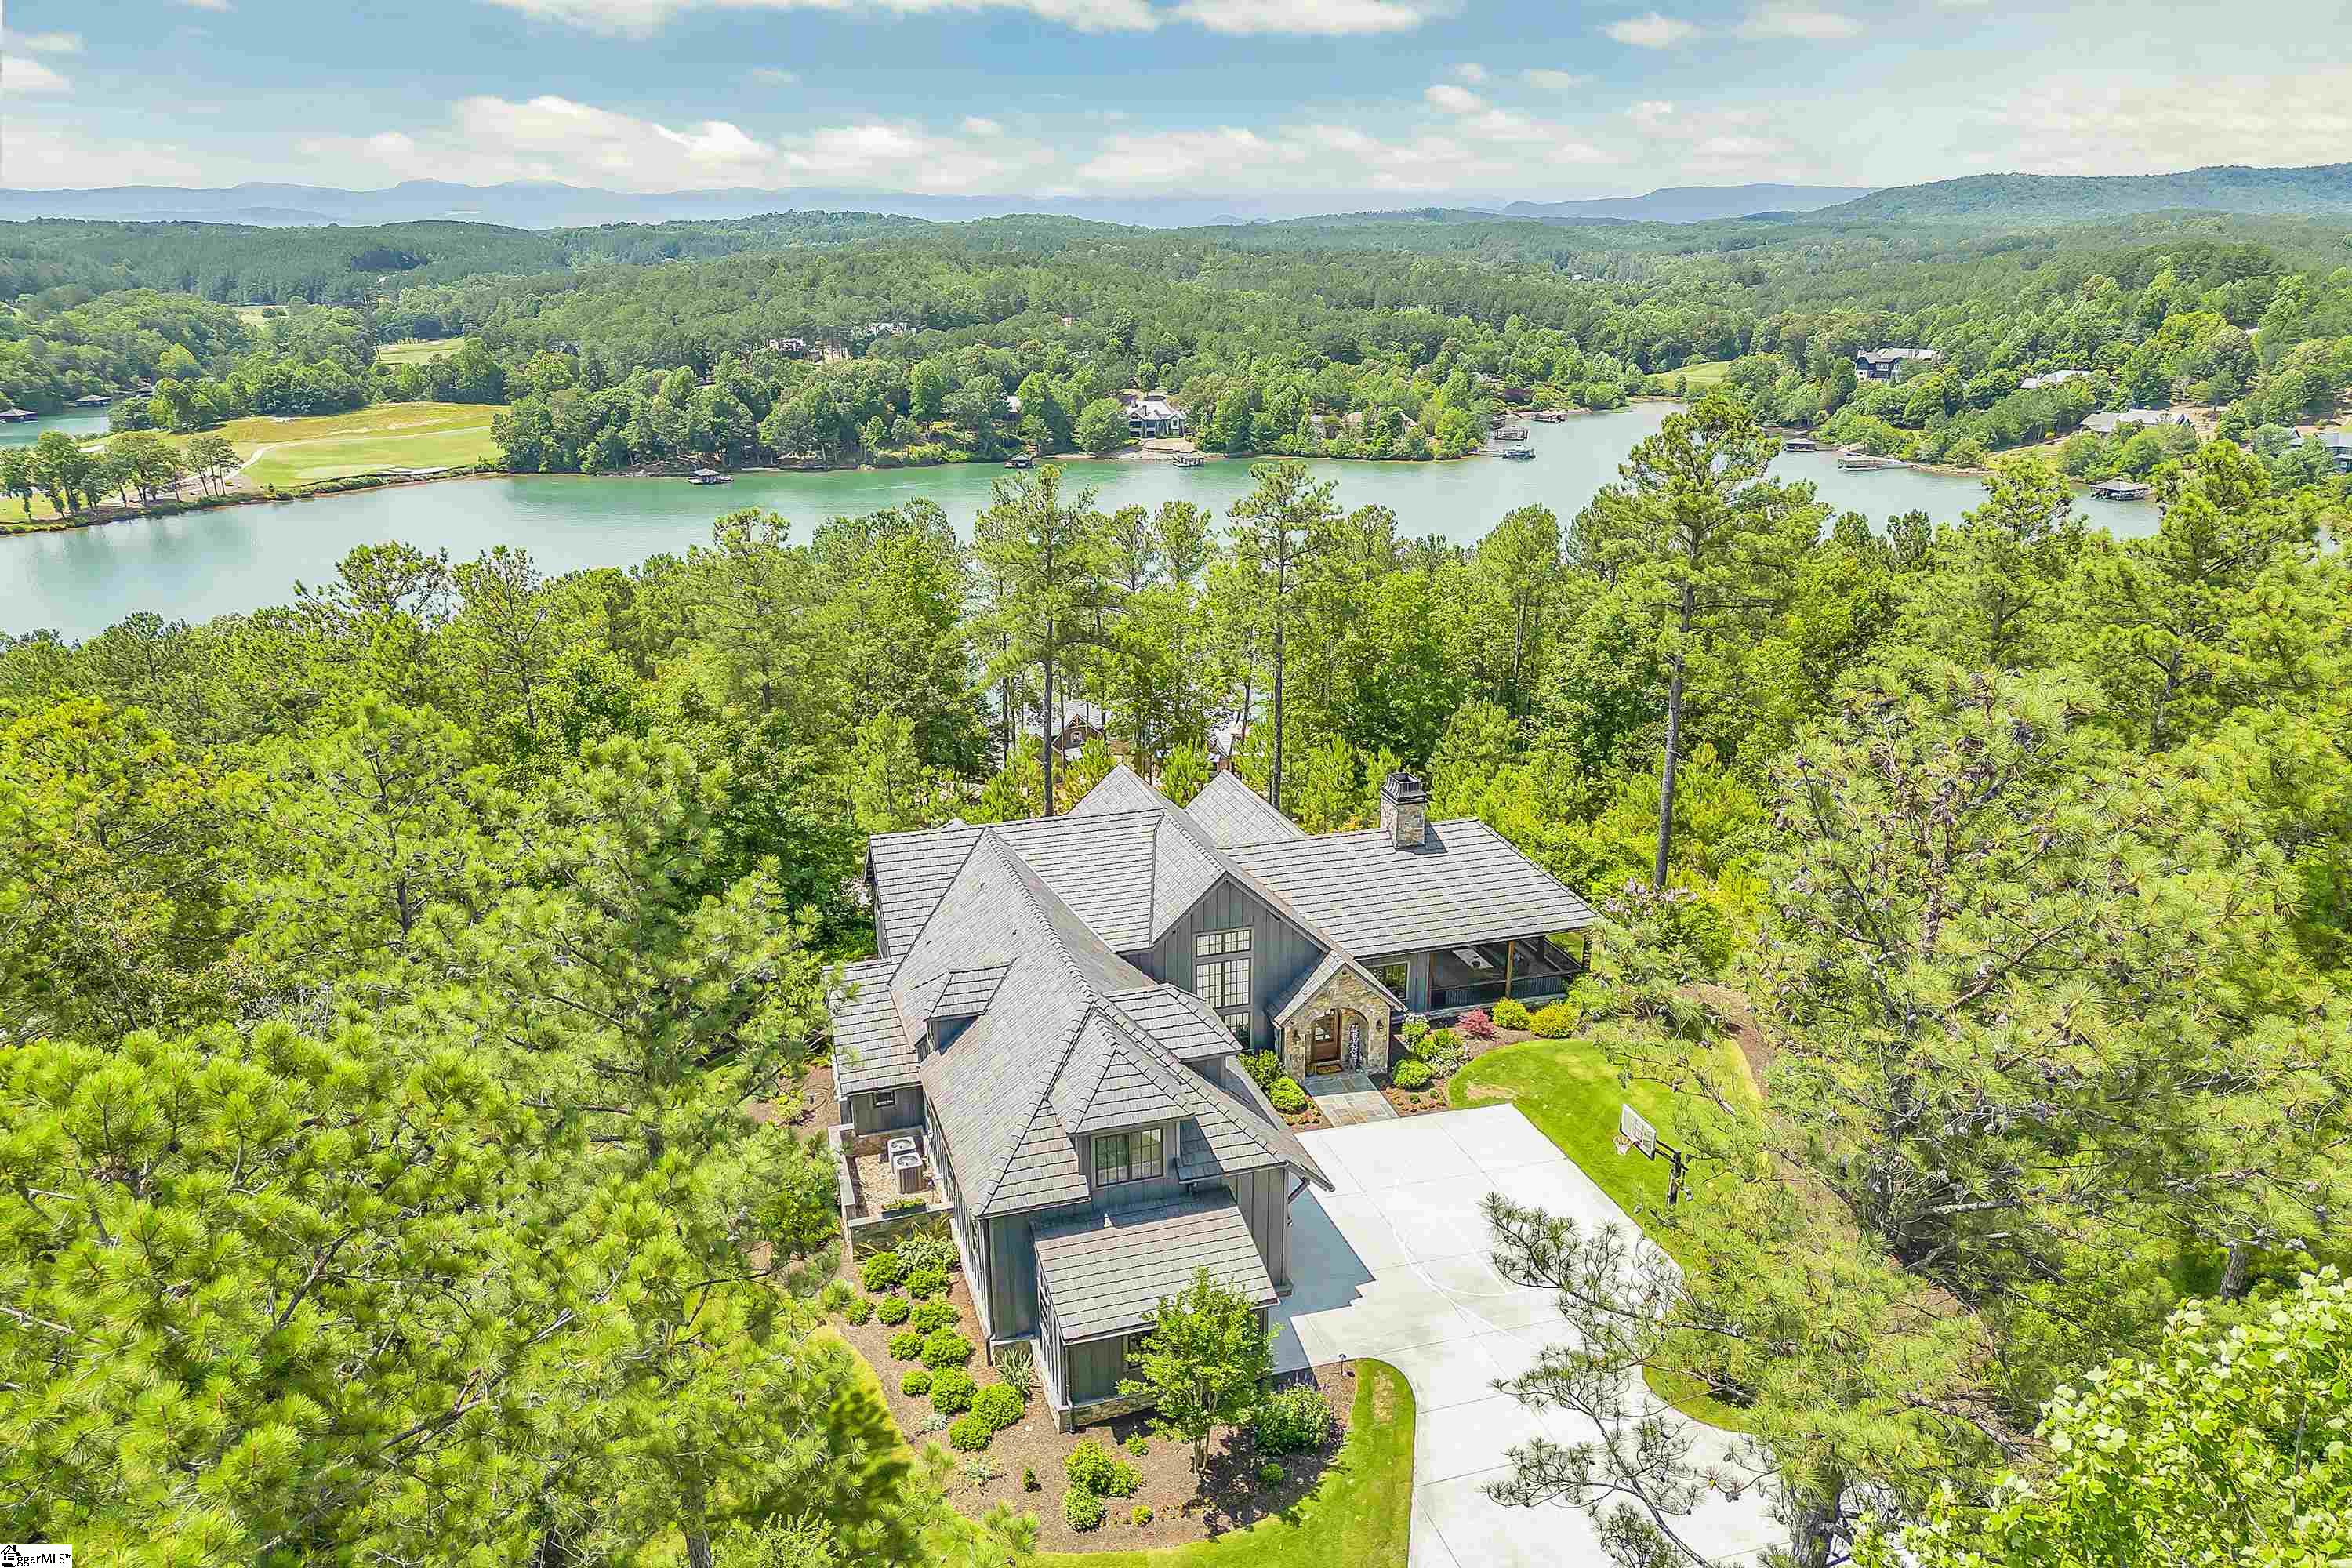 Perched on an elevated site this transitional modern farmhouse truly captivates the beauty of living at The Reserve at Lake Keowee.  A northern facing homesite, the Blue Ridge Mountains and Lake Keowee await in the distance for year-round views and magical sunsets.  This home sits on nearly 2 acres of land with no homes to your left or right and raised from the street below to embrace serenity and privacy.    A winding driveway gravitates you into the grand entry of this spectacular Brad Wright design and Sexton Griffith constructed home built in 2019. The meticulous landscaping with zoysia grass and flower gardens surrounding the house encompass the raw beauty of Lake Keowee living.   Designed for functional living, there is a seamless flow with the open concept floor plan that boast plenty of entertaining space as well as seclusion and solitude.  A plethora of natural light funnels in through the great room windows with water and mountain views in the backdrop.  The wrap around kitchen with a large island allows for ample seating and well-designed kitchen space.  9-inch Oak wood floors reflects the natural light to fill the vaulted wood beamed ceilings.  This home comprises of three true master suites with the Primary Bedroom on the main level and two additional suites on the upper level.  All bathrooms are enlarged with dual vanities and oversized showers. The Primary bedroom connects to the hall from the garage for easy entrance after a long day enjoying all the world class amenities The Reserve has to offer.  Ample storage can be found throughout the home and is tucked away as if you never knew it was there.   The second level boasts a separated family room with a large seating area as well as a murphy bed for additional sleeping arrangements. A bonus room upstairs provides additional seating area and jaw dropping mountain and lake views.   A nearly 400 sq ft. screened in porch with vaulted ceilings can be used year-round with the gas log fireplace television above the mantle.  Step outside to your back patio to enjoy your peace and quiet with a fireplace and private hot tub. This home is must see!  A Premier Membership of $72,000 is required at closing.